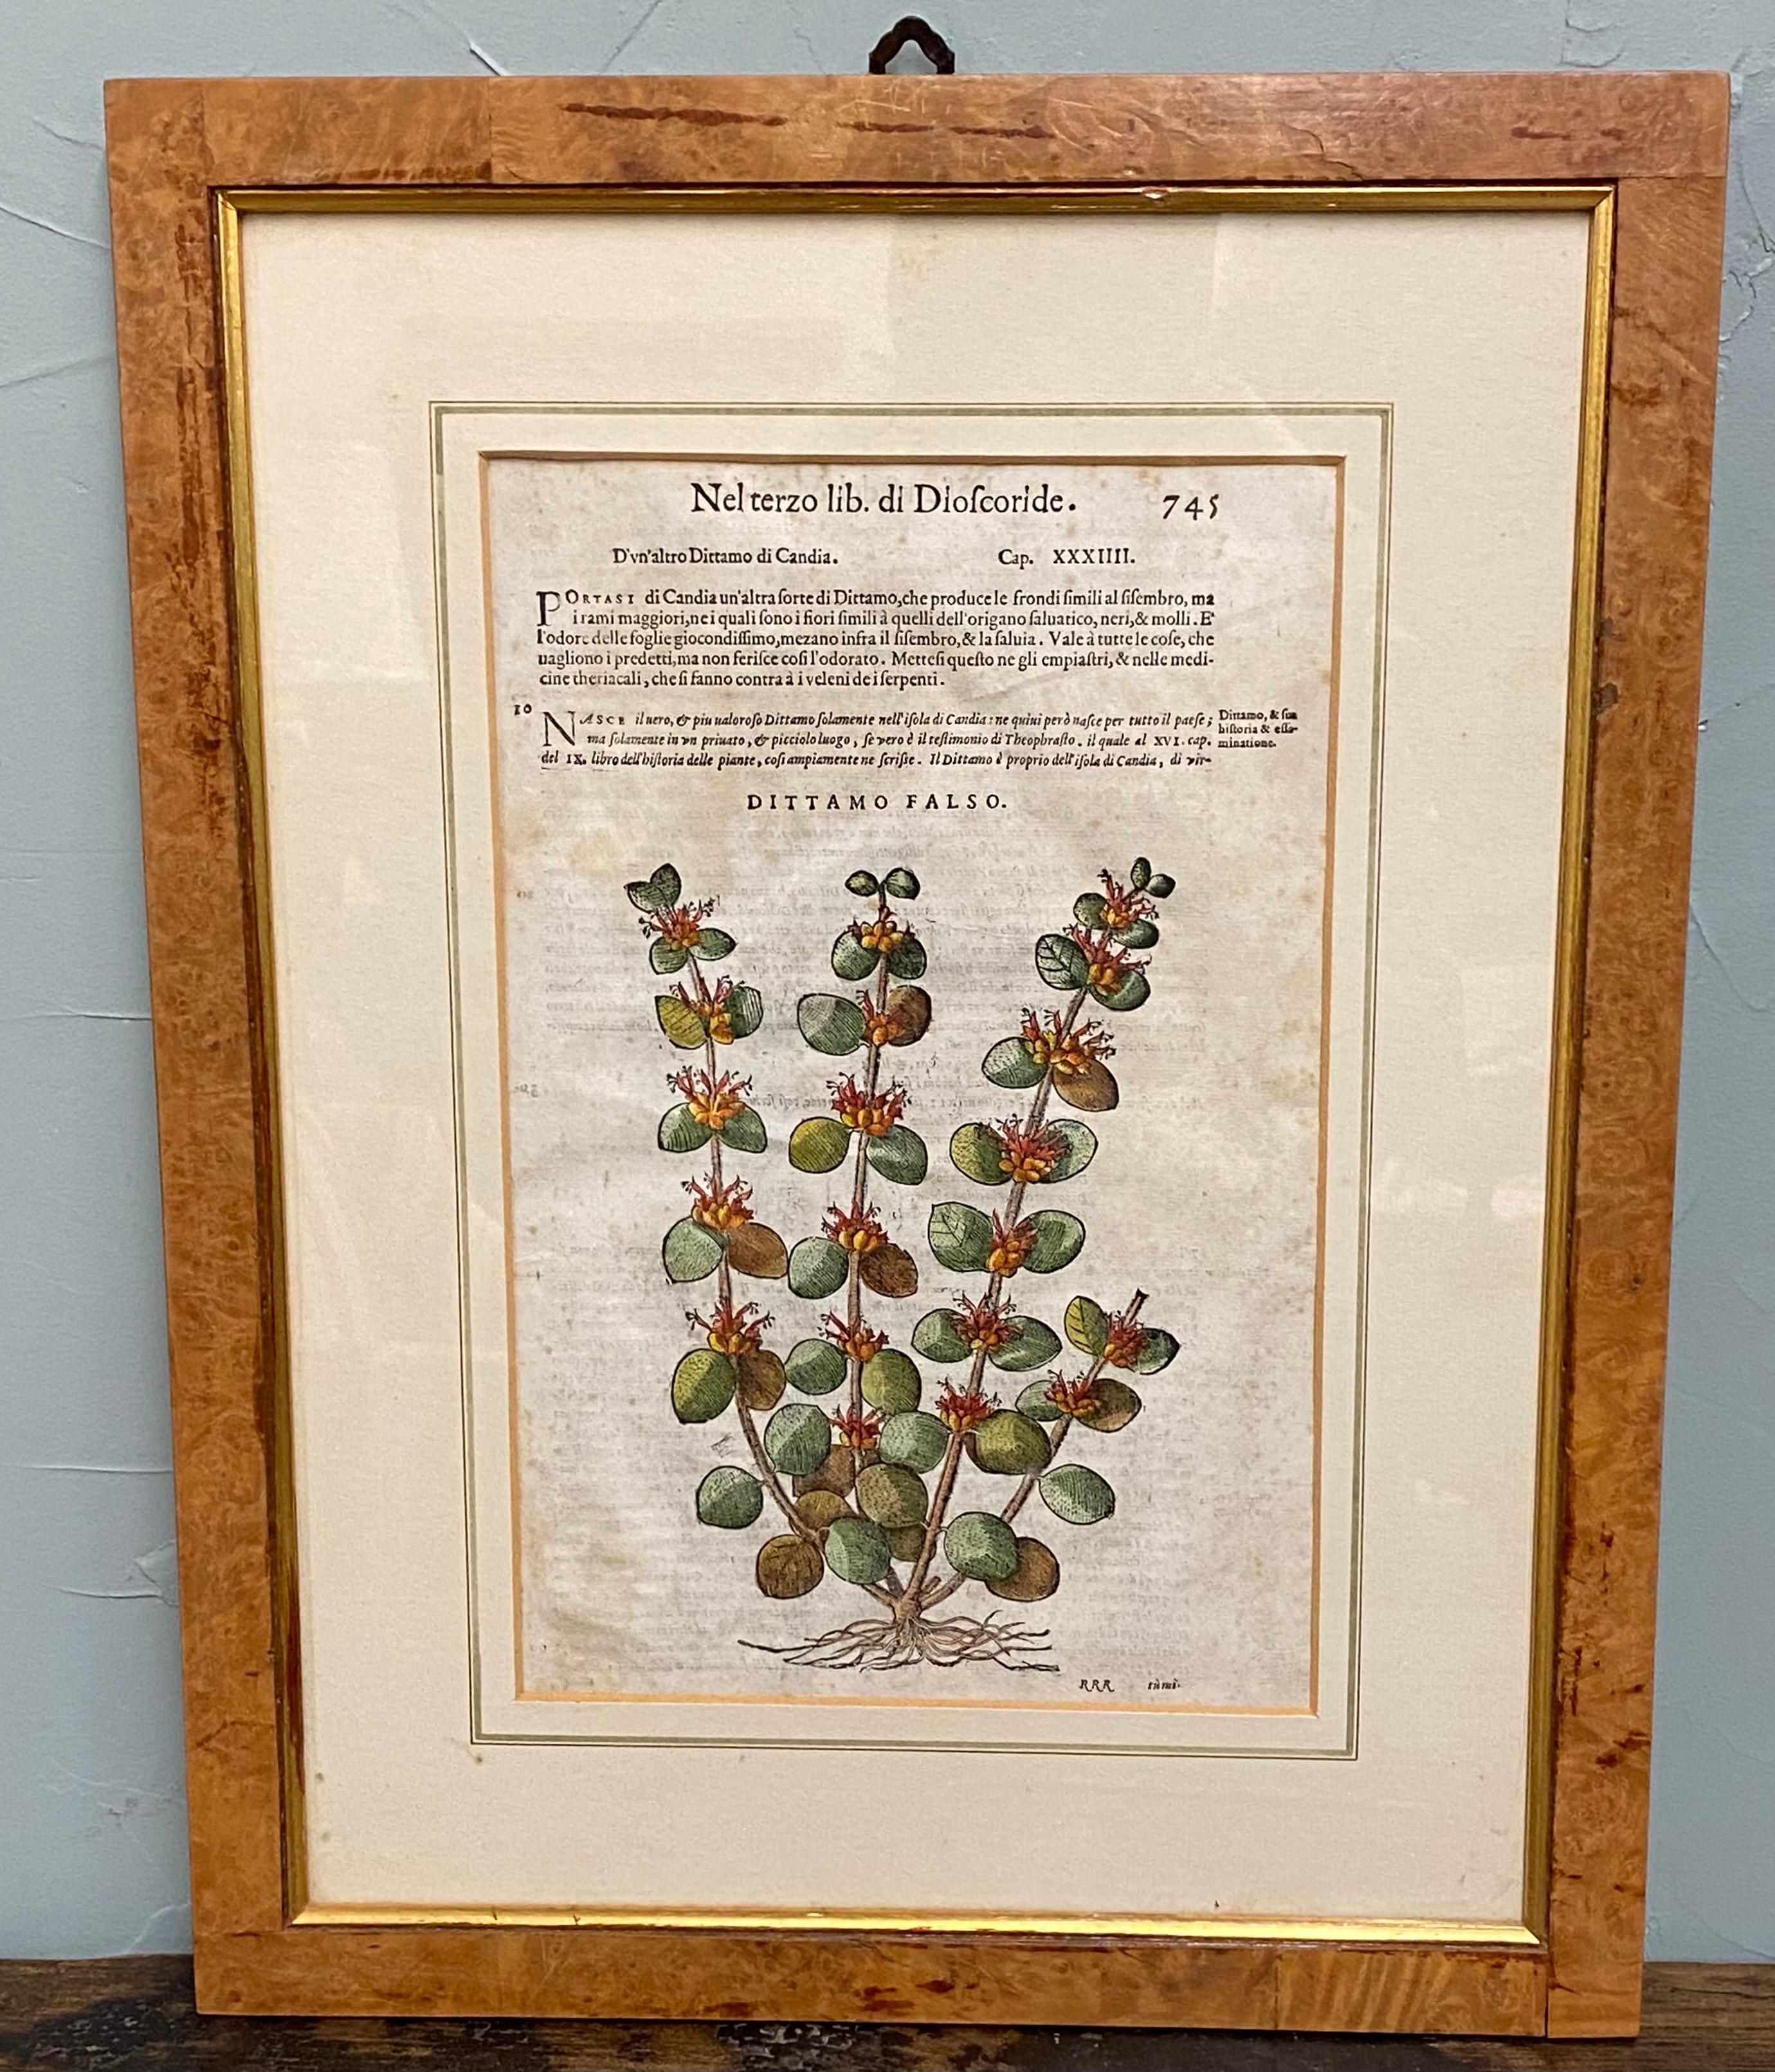 Pair of exceptional antique English botany prints, hand colored in Italian burl olive wood and gold leaf frames. 4 additional smaller prints available, sold separately.
Great wall decoration for the bedroom, bath or powder room.
Prints measure: 3